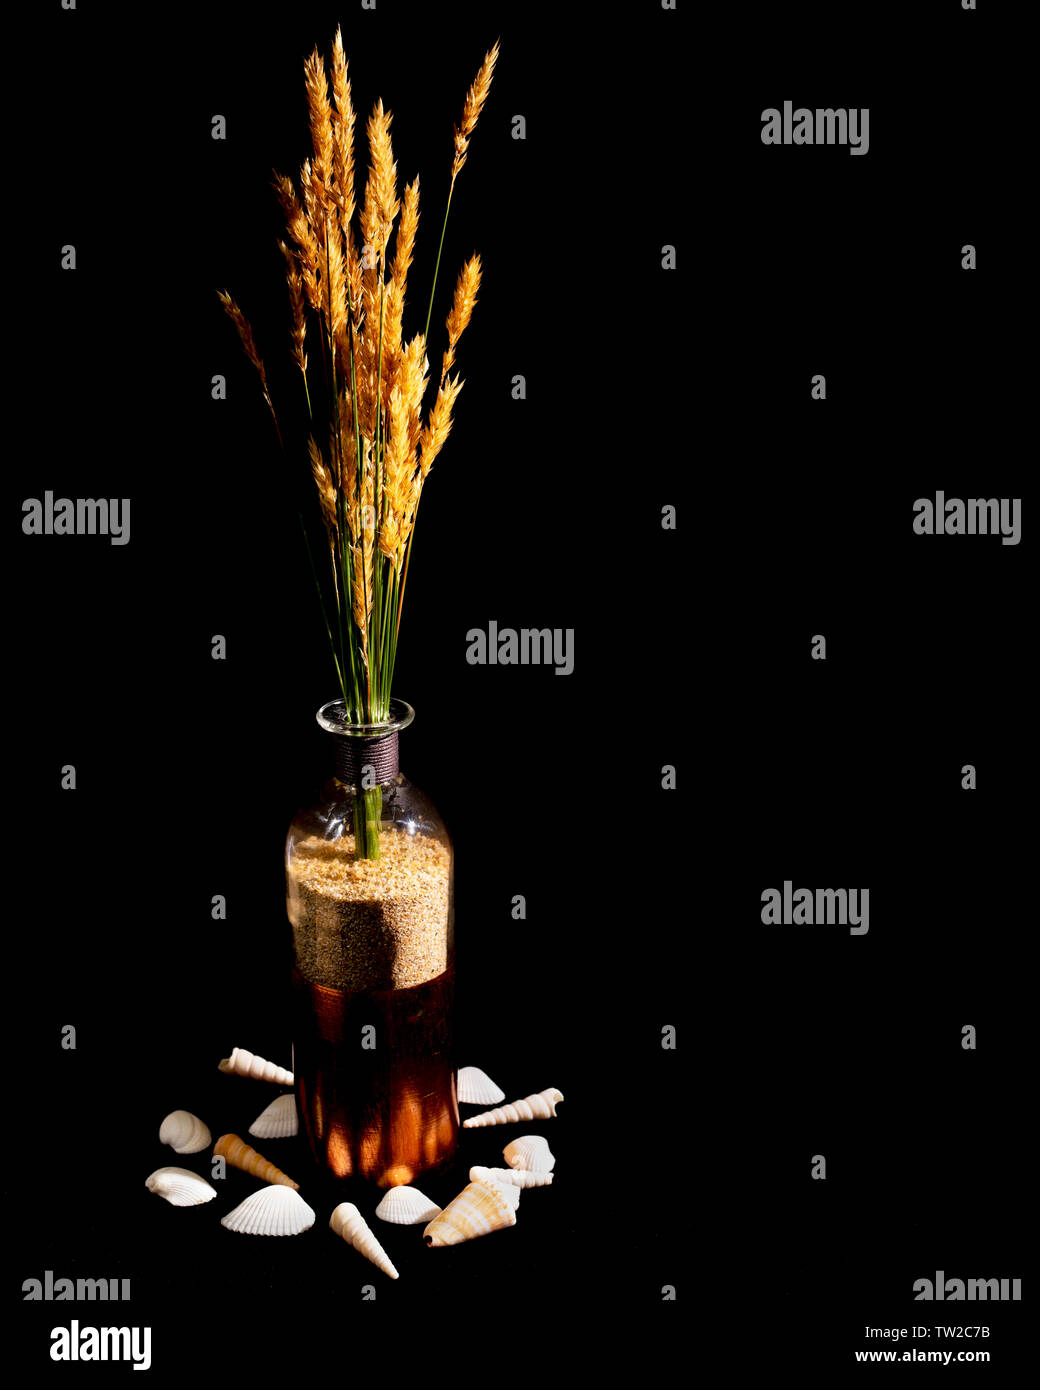 Wild grass with seed heads is shown in a red bottle with copper accent, filled with sand. Sea shells surround the base of the bottle. Stock Photo